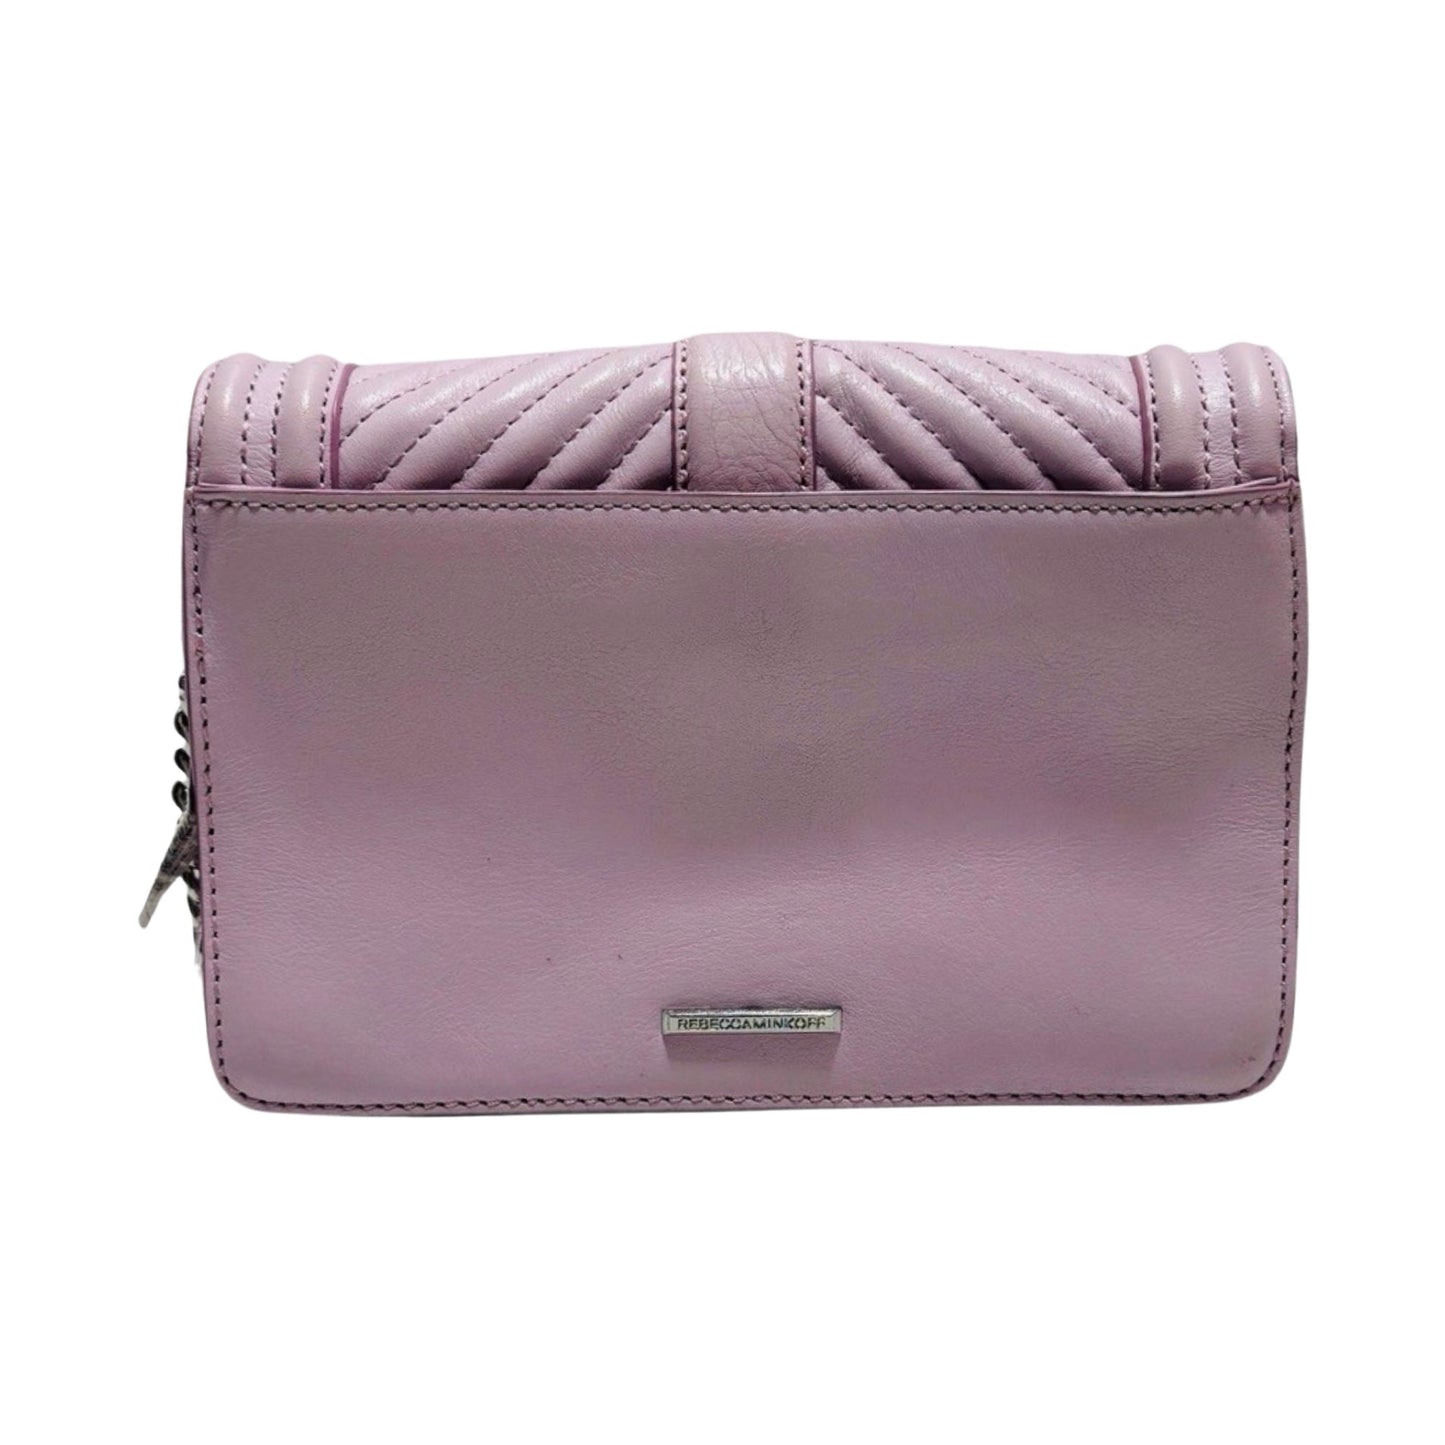 Love Nubuck Turnlock Closure with Adjustable Chain & Leather Strap Lavender Crossbody By Rebecca Minkoff  Size: Small